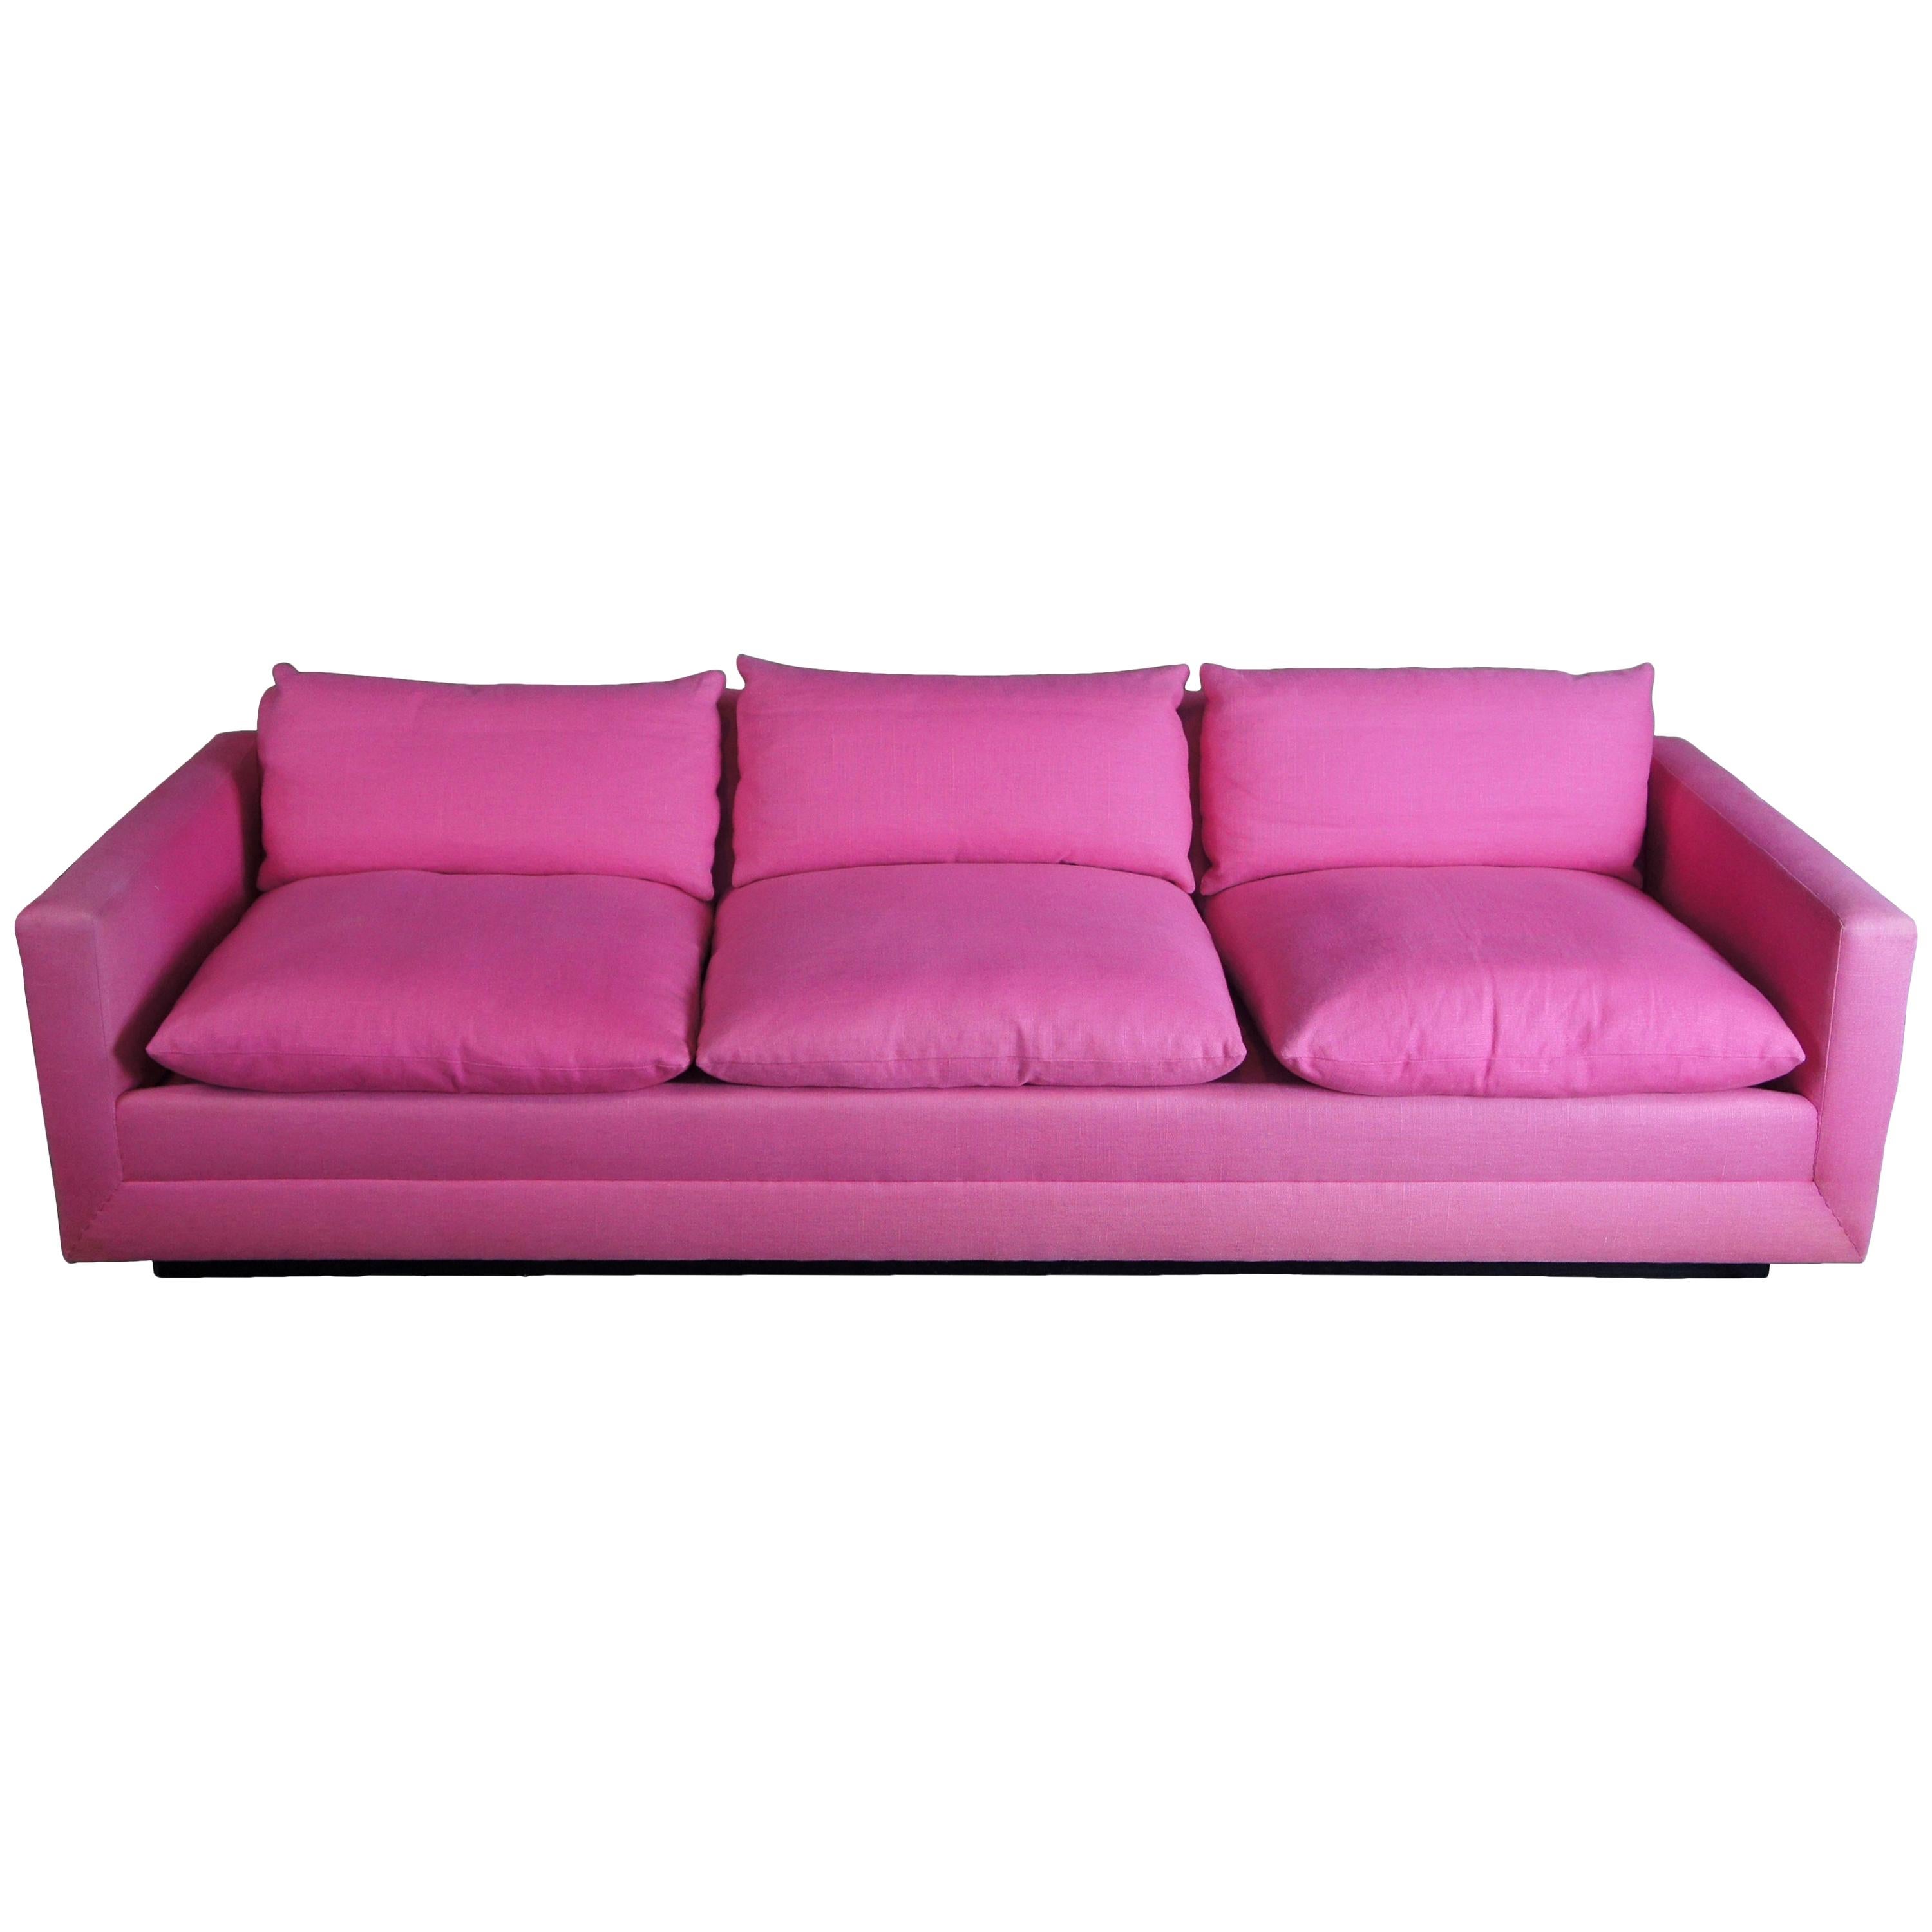 Mid-Century Modern 3 Seater Pink Floating Platform Sofa Couch Down Filled